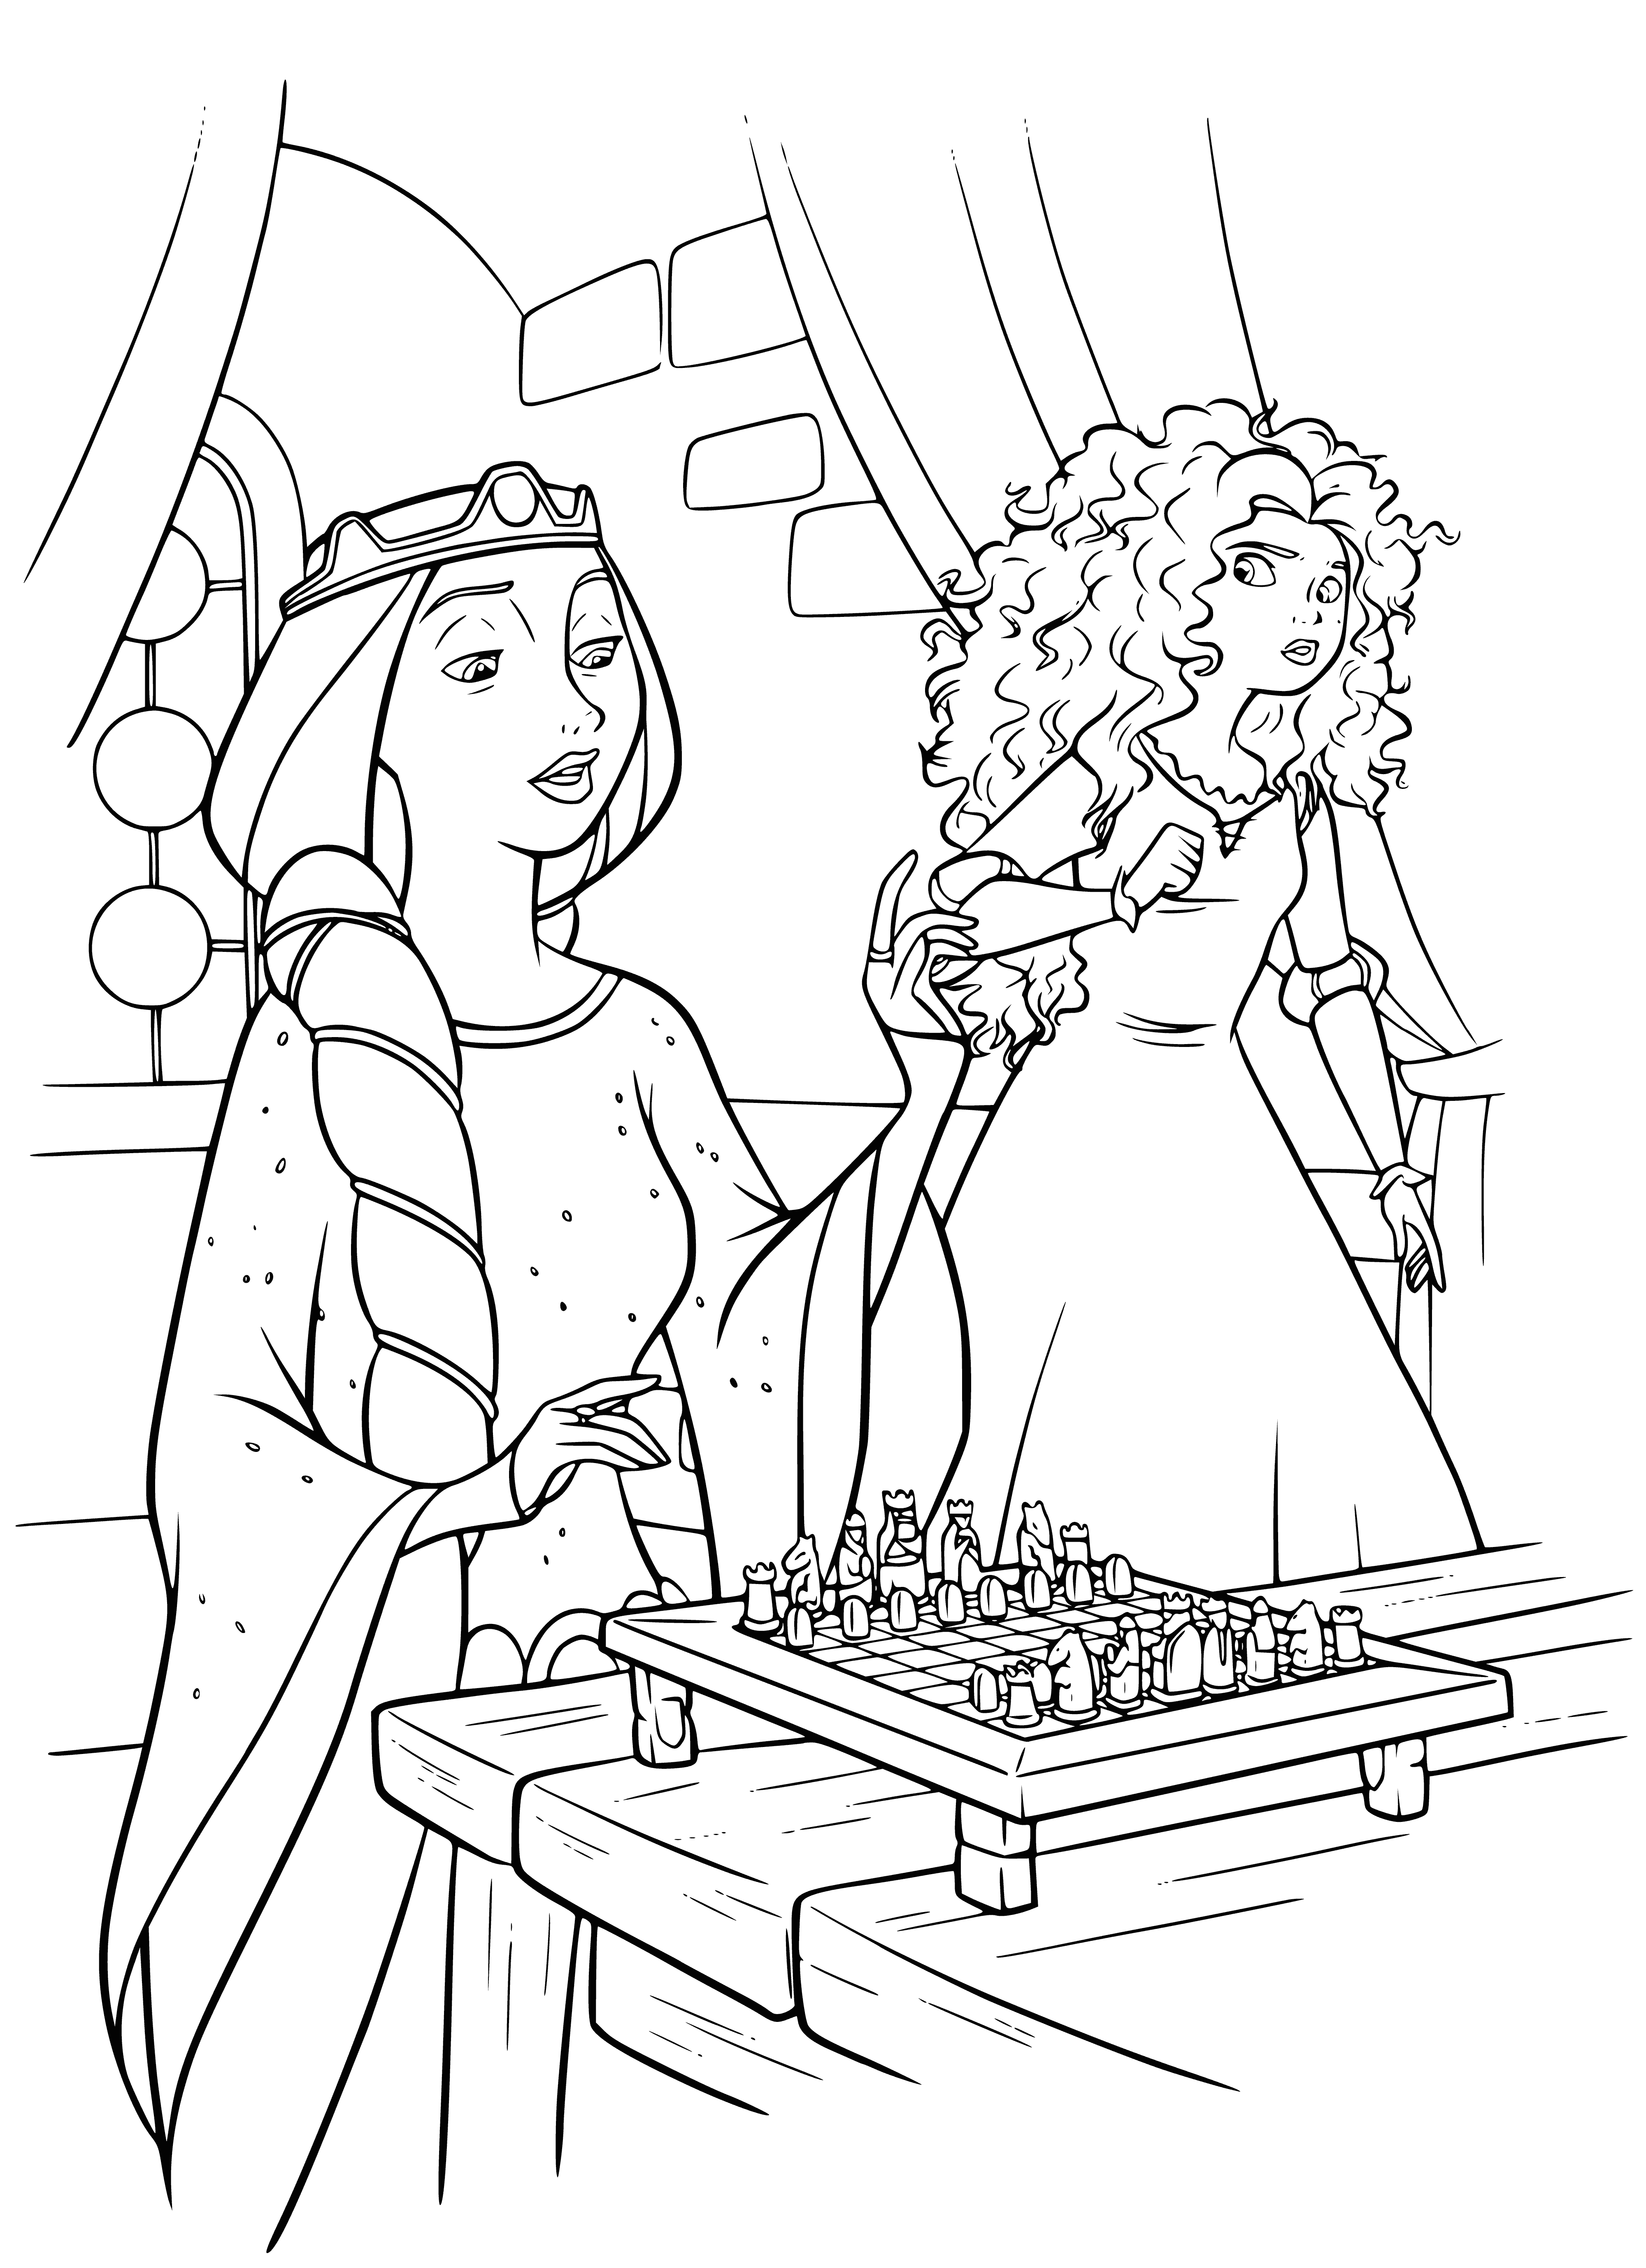 coloring page: Two players battle for control of a chess board in an intense game of strategy.